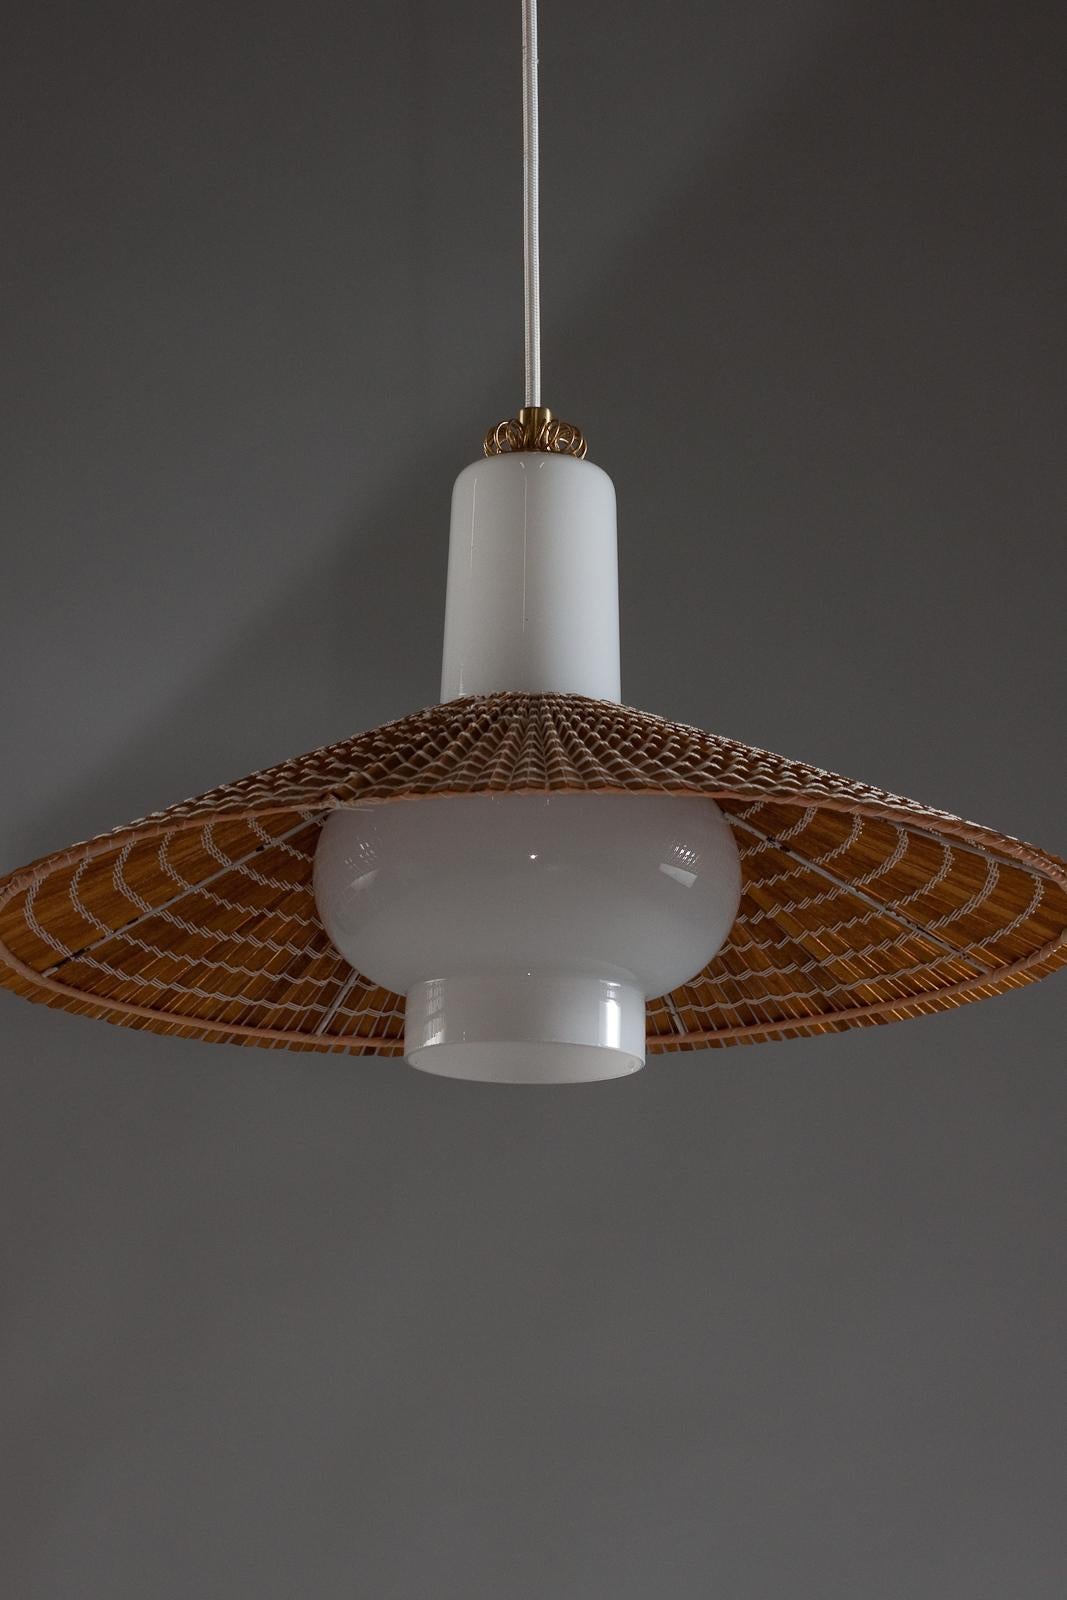 20th Century Paavo Tynell, 1950's opaline glass pendant with wooden slat shade, Idman Oy For Sale